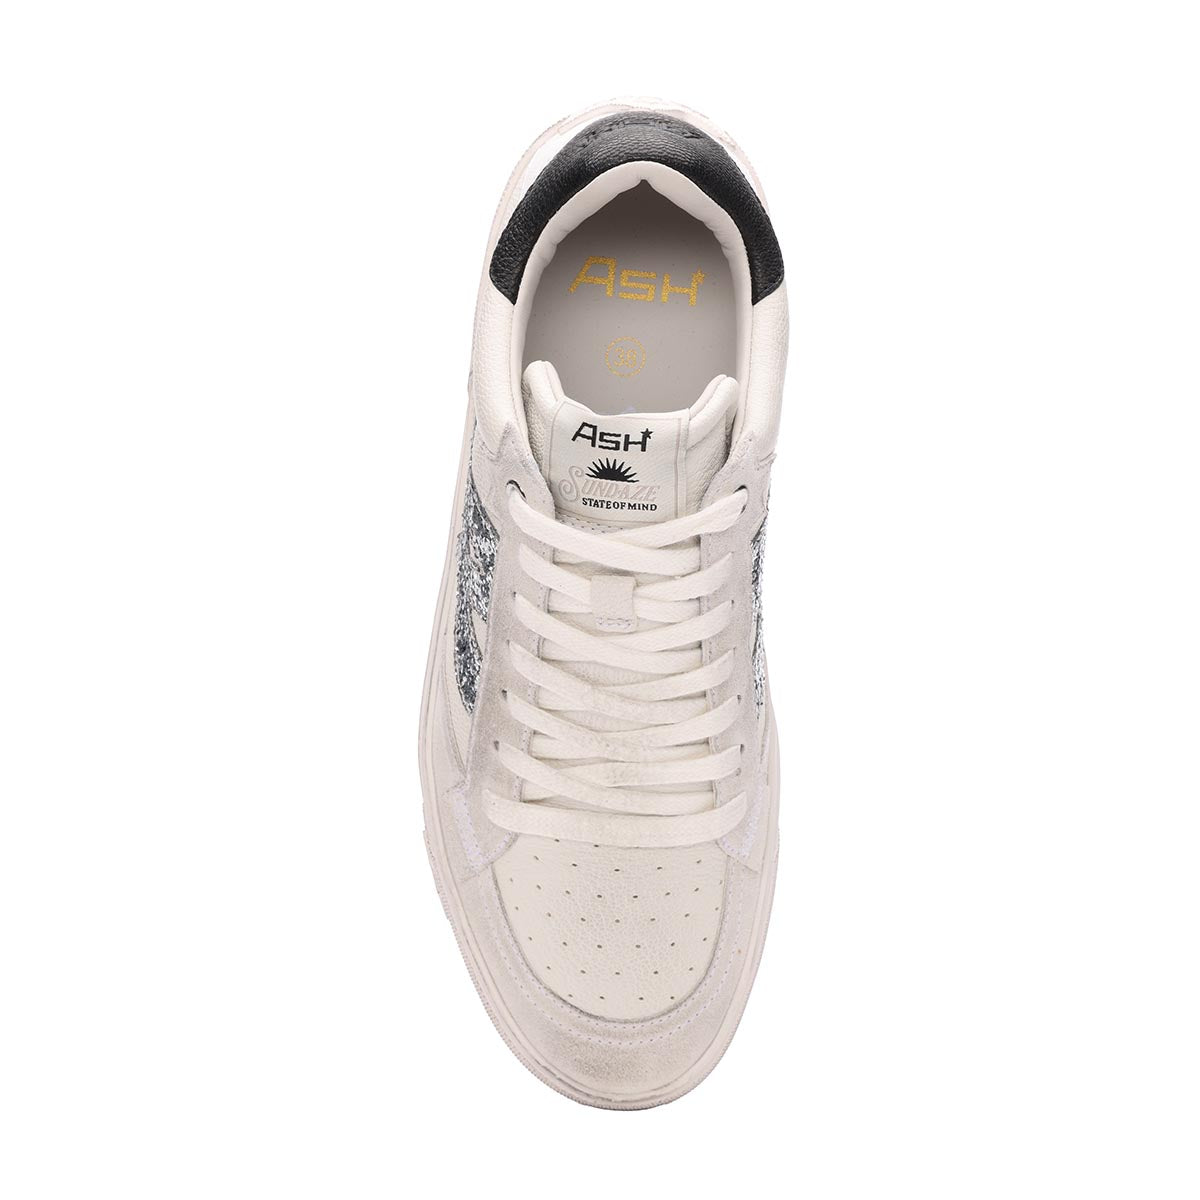 Moonlight Vintage Glitter Sneaker - Off-White/Silver - Top View - ASH